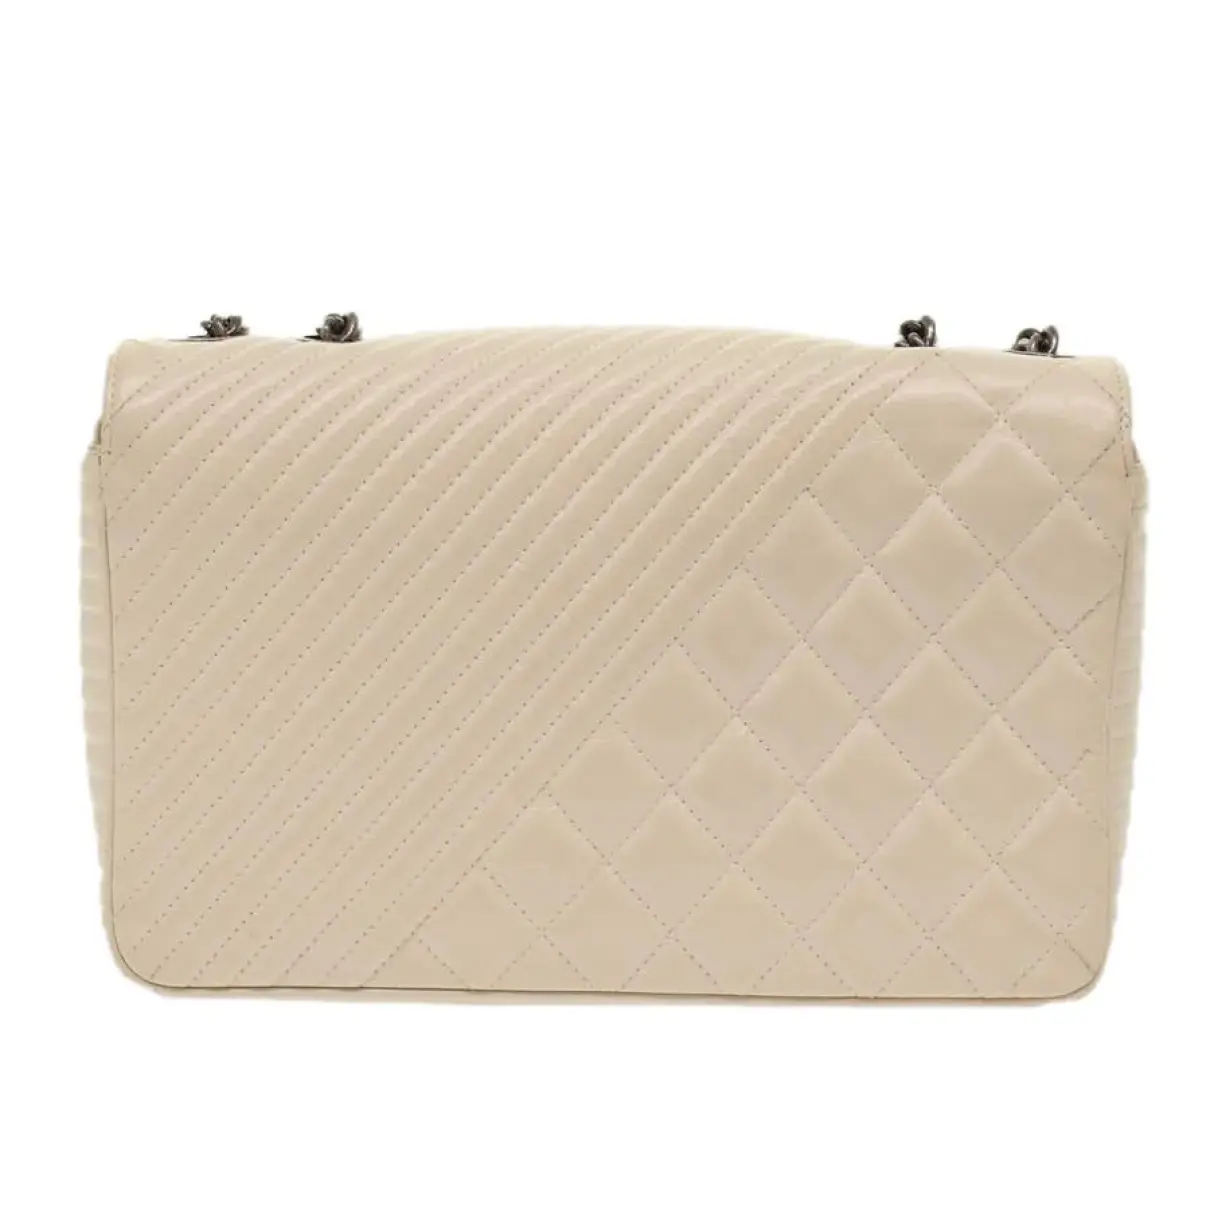 Buy Chanel Timeless/Classique exotic leathers handbag online